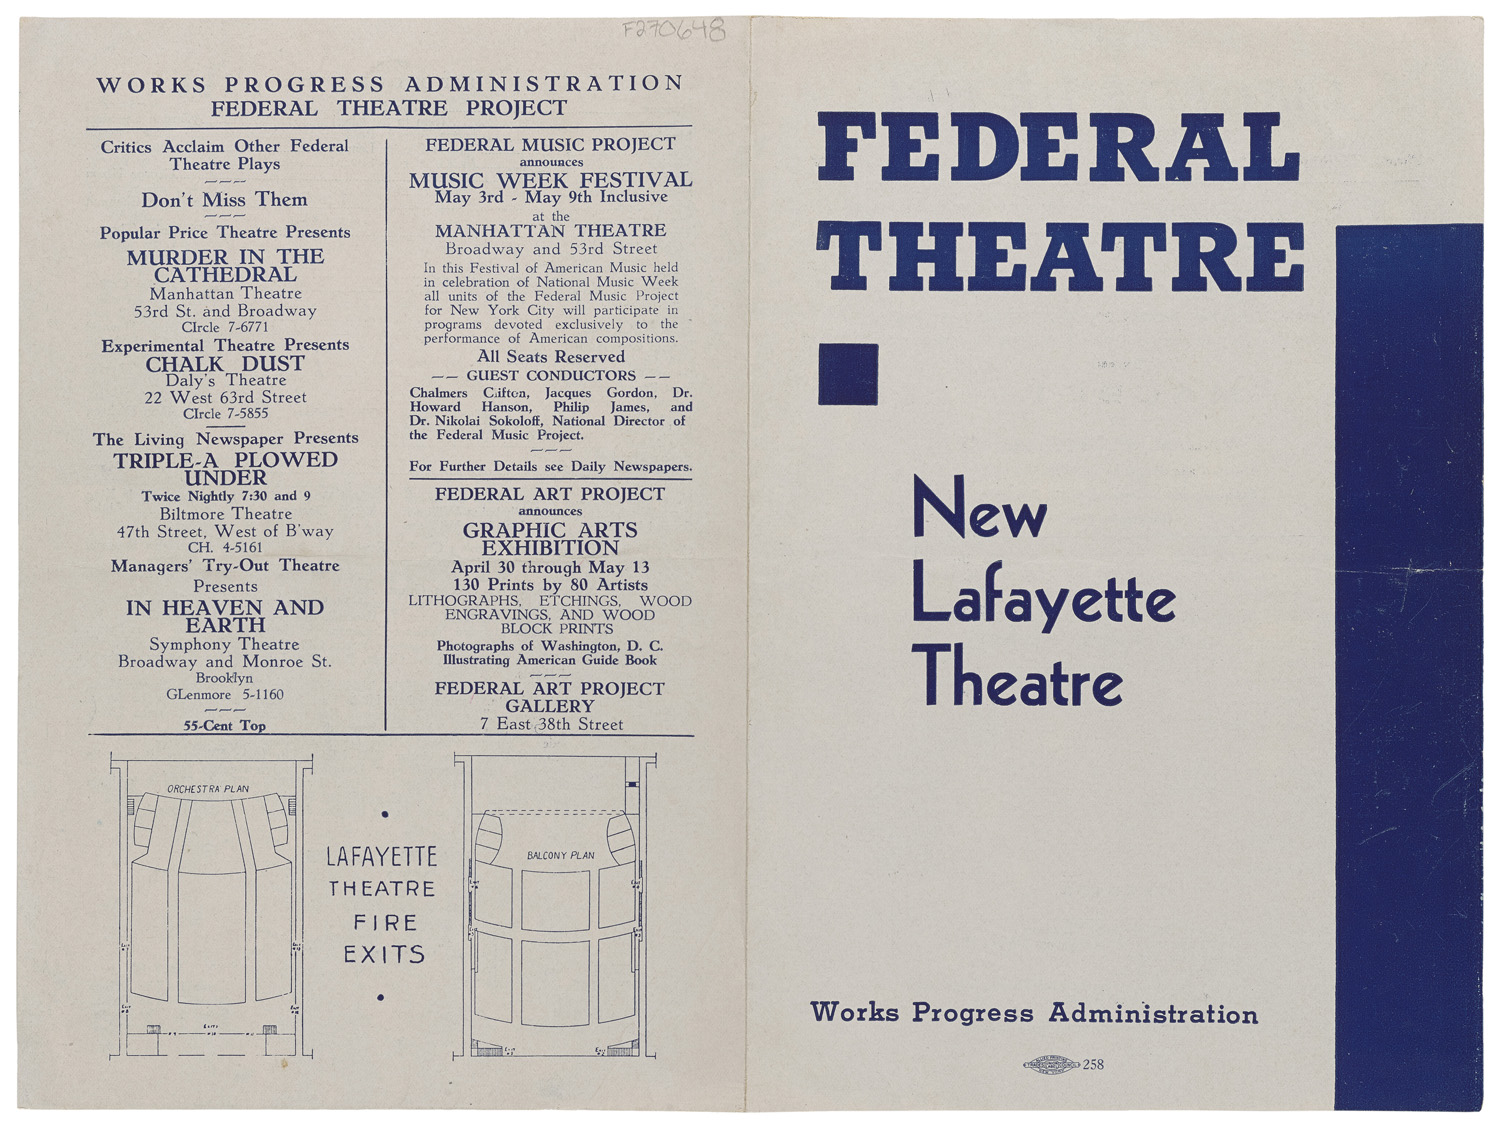 Front and back pages of the program for the WPA Federal Negro Theatre Unit&#039;s initial run of Macbeth at Harlem&#039;s New Lafayette Theatre, starring Jack Carson as Macbeth